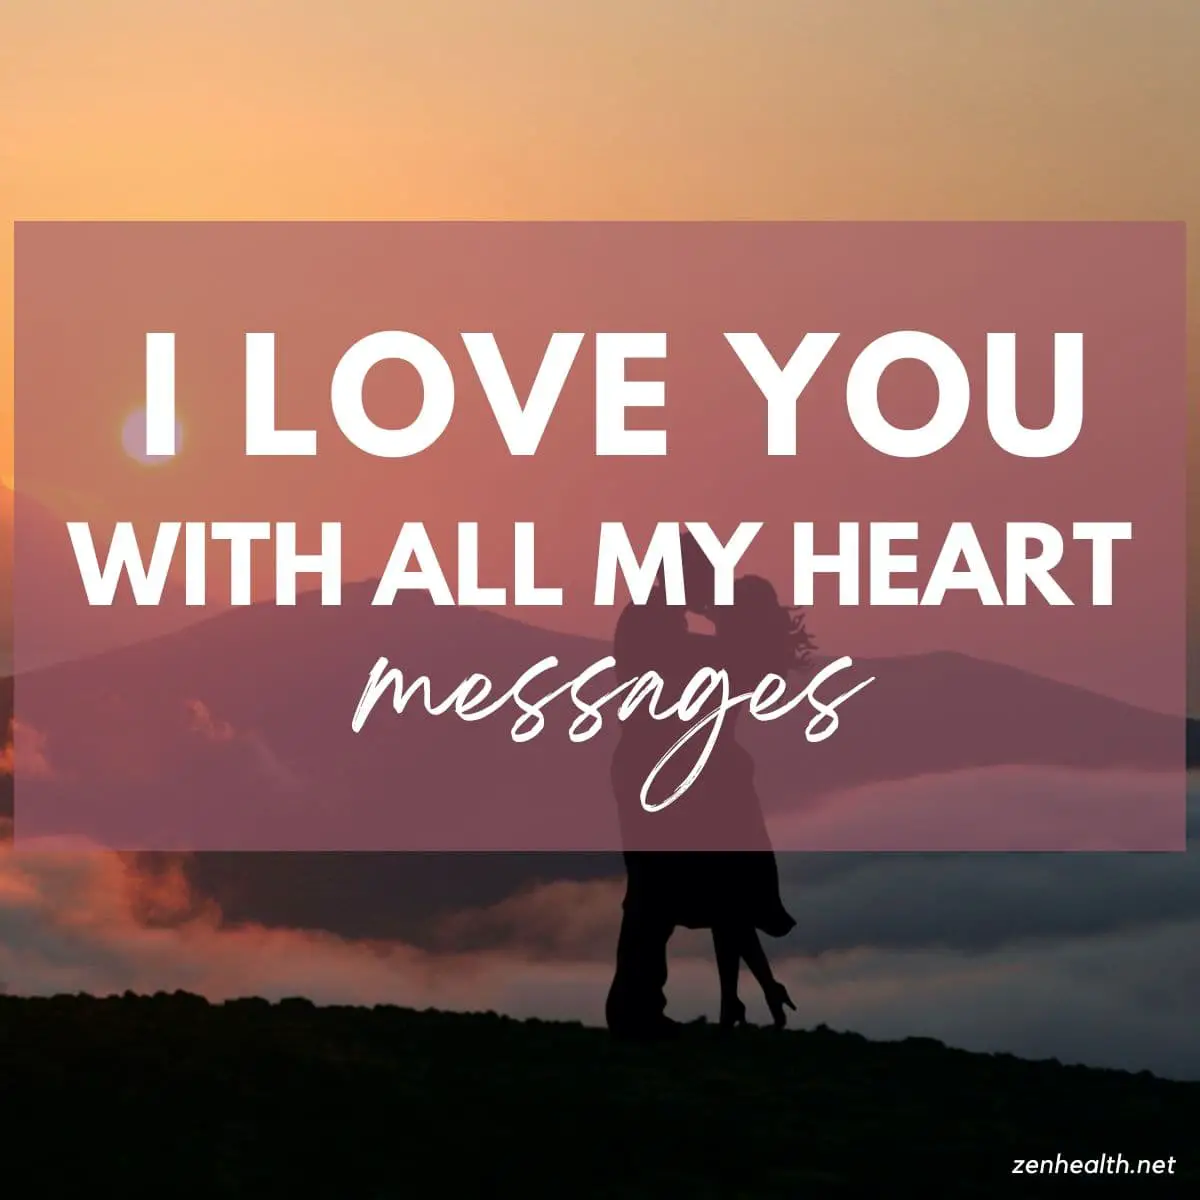 I love you with all my heart messages text overlay on a photo of a couple kissing with the mountains in the background